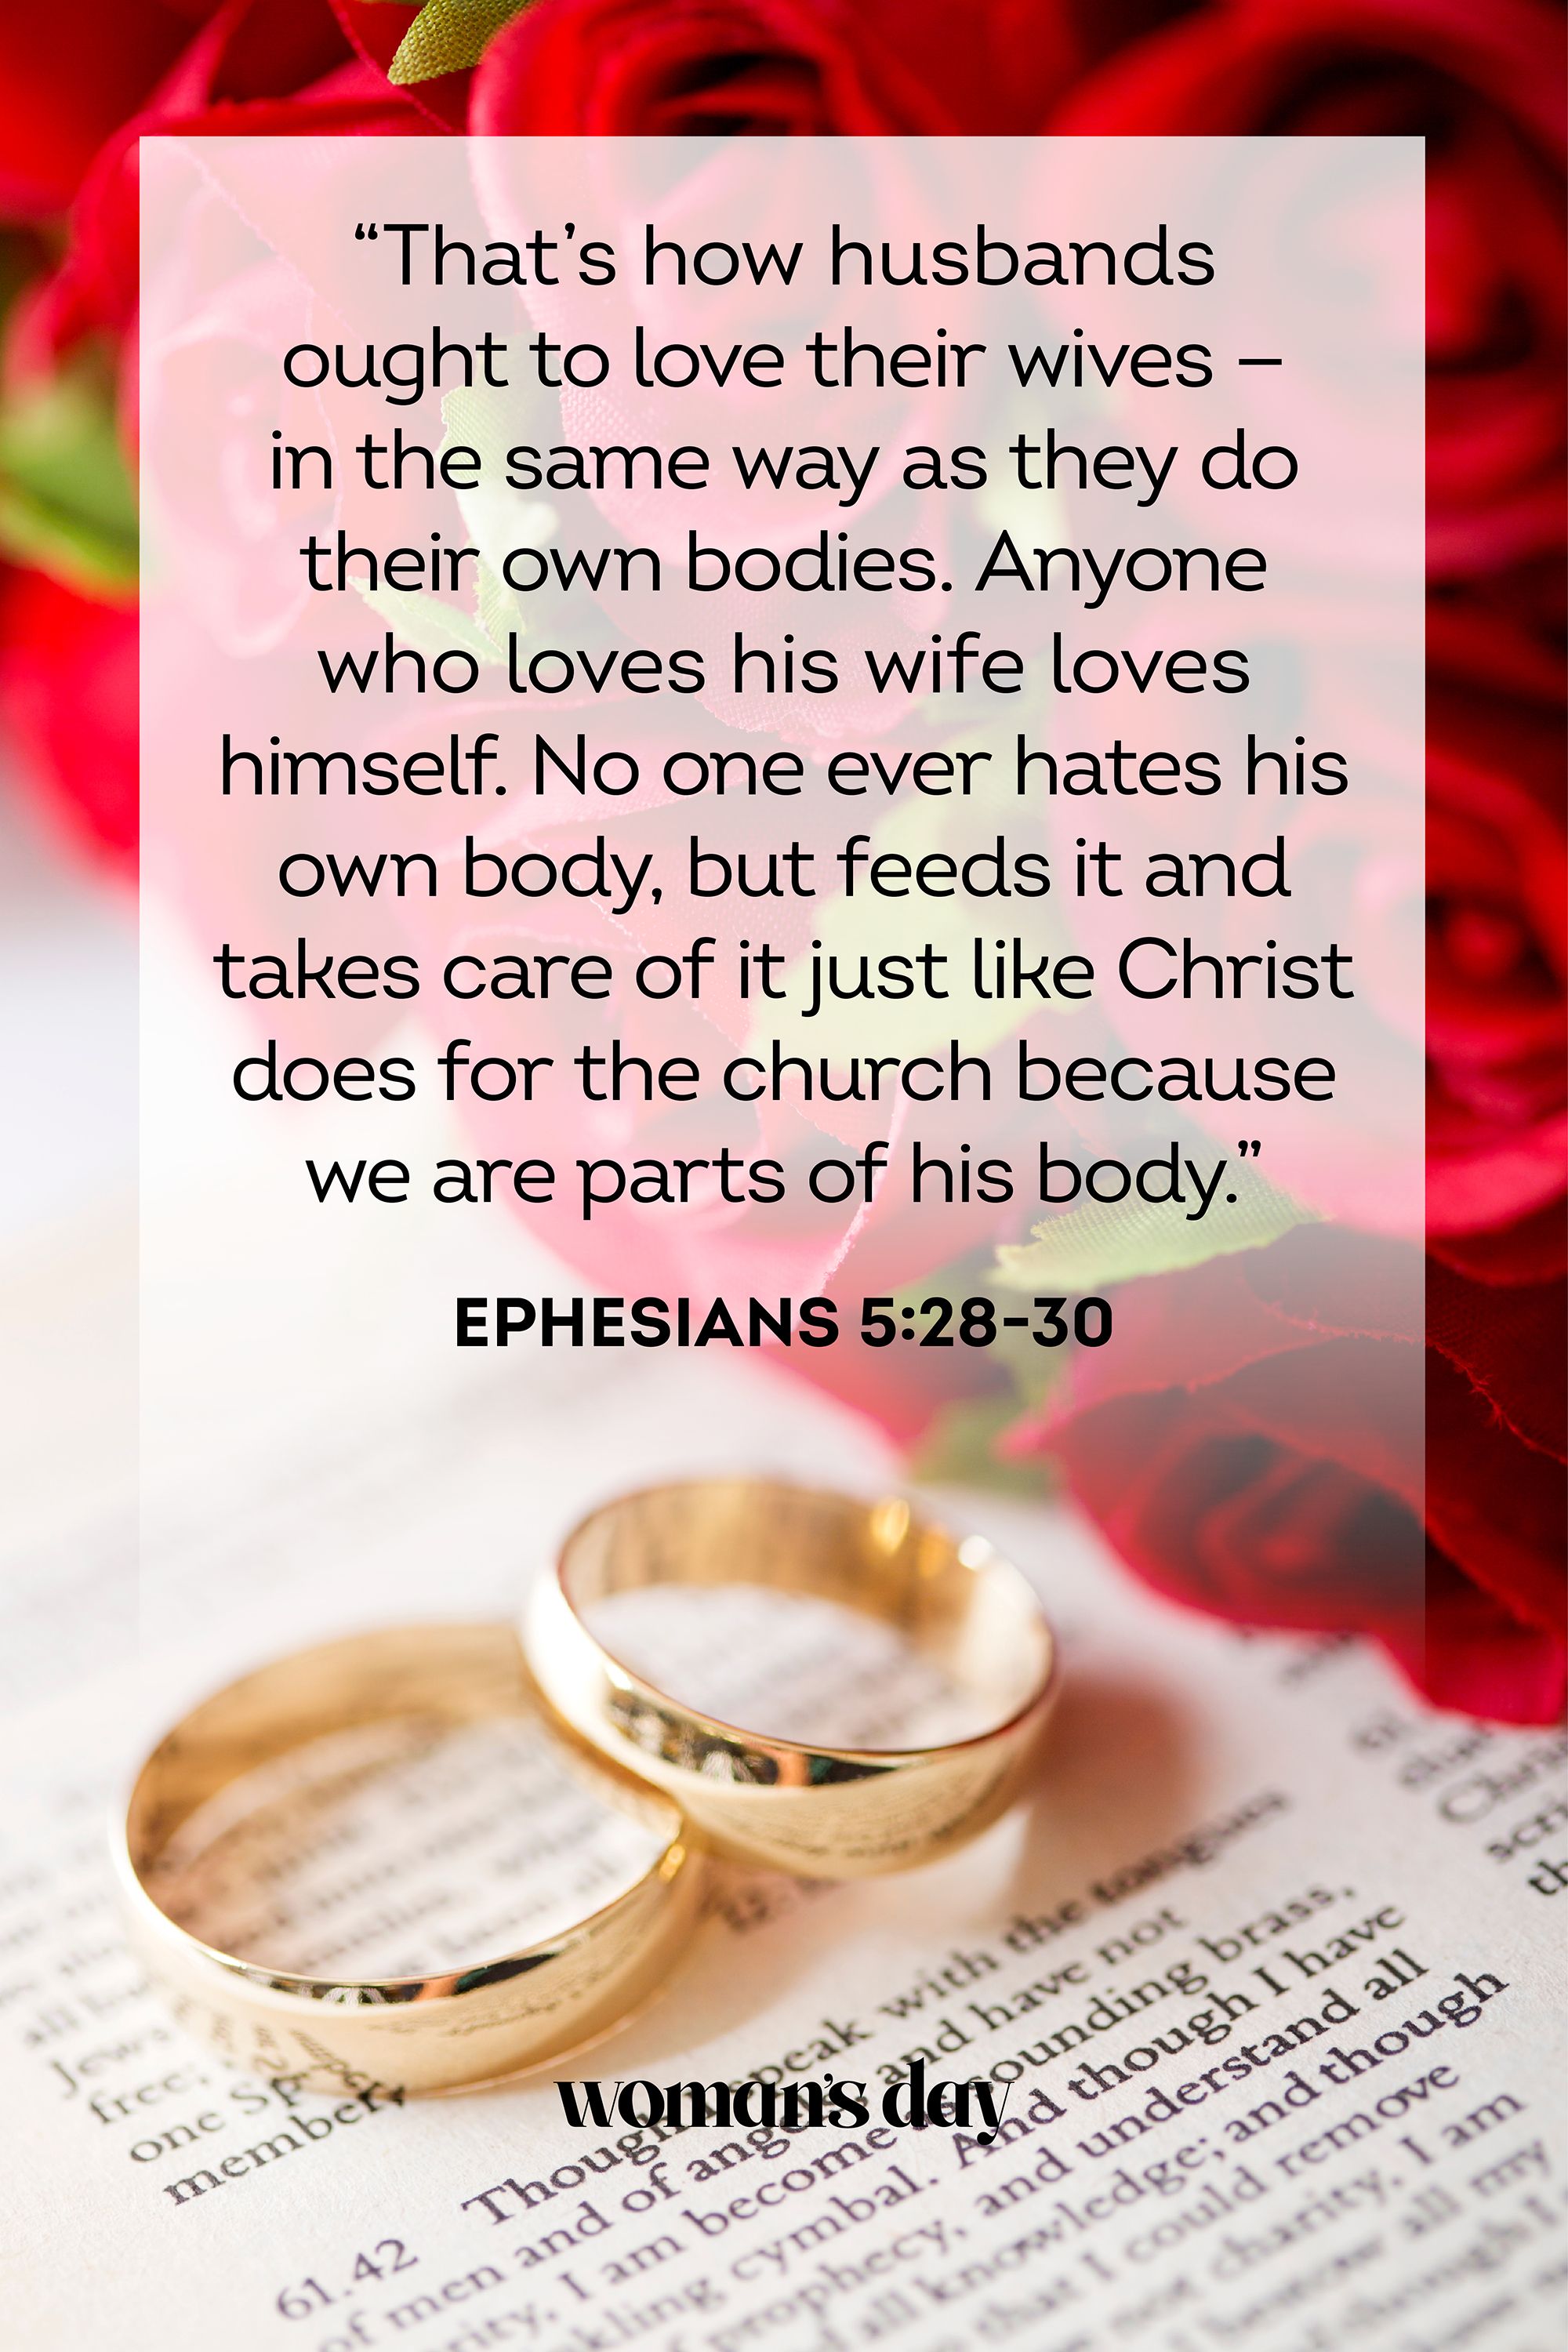 biblical references to married sex